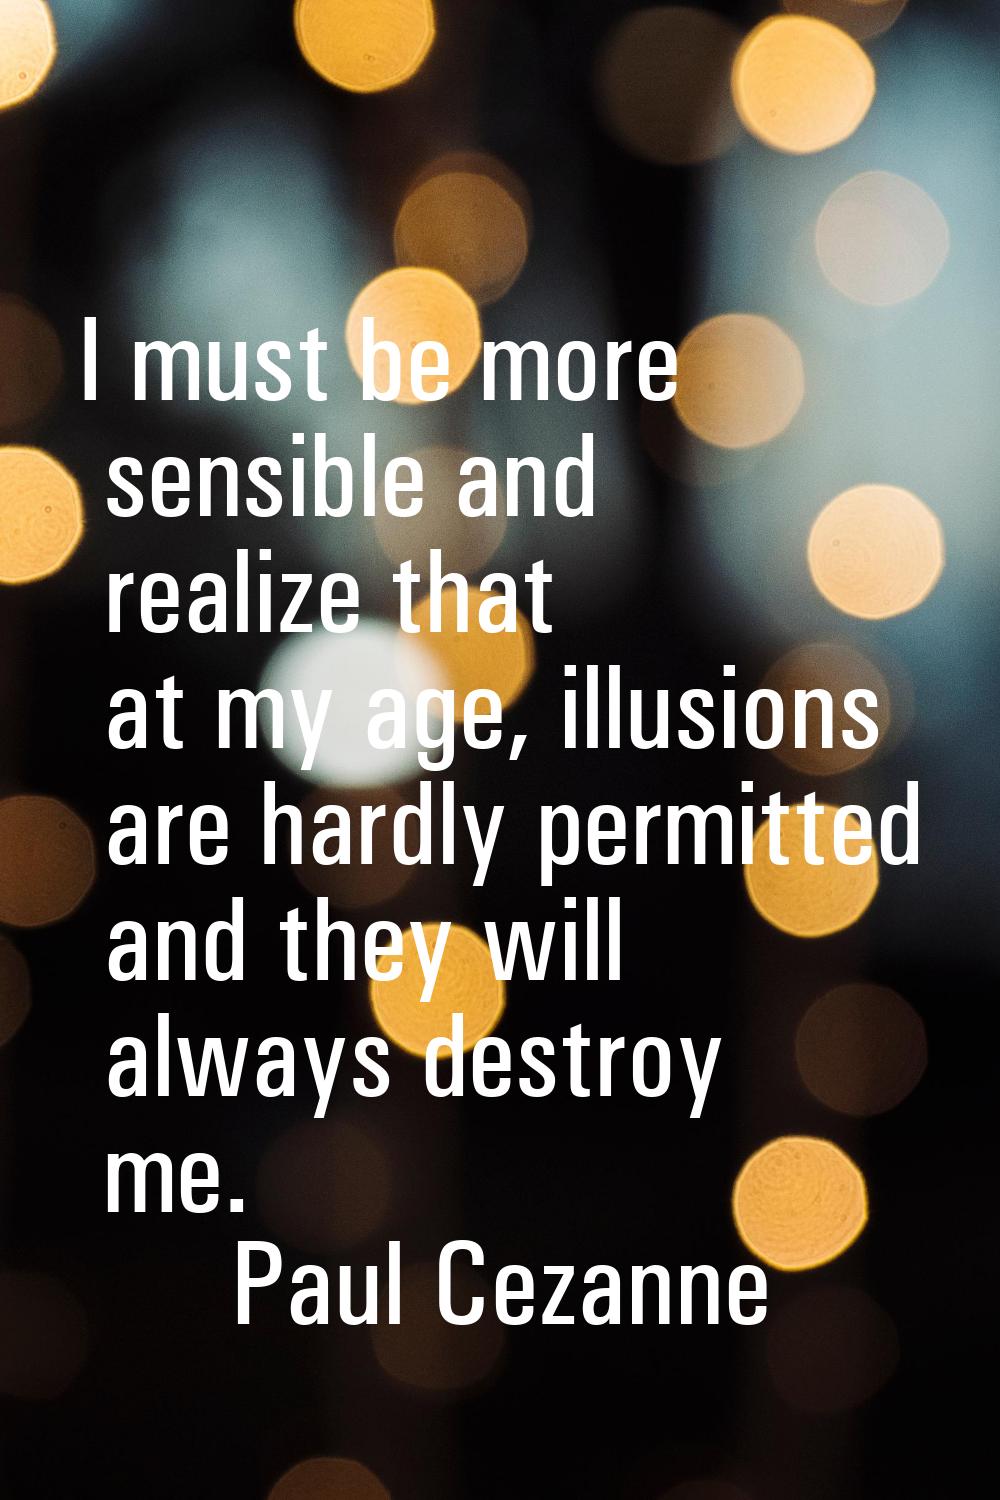 I must be more sensible and realize that at my age, illusions are hardly permitted and they will al